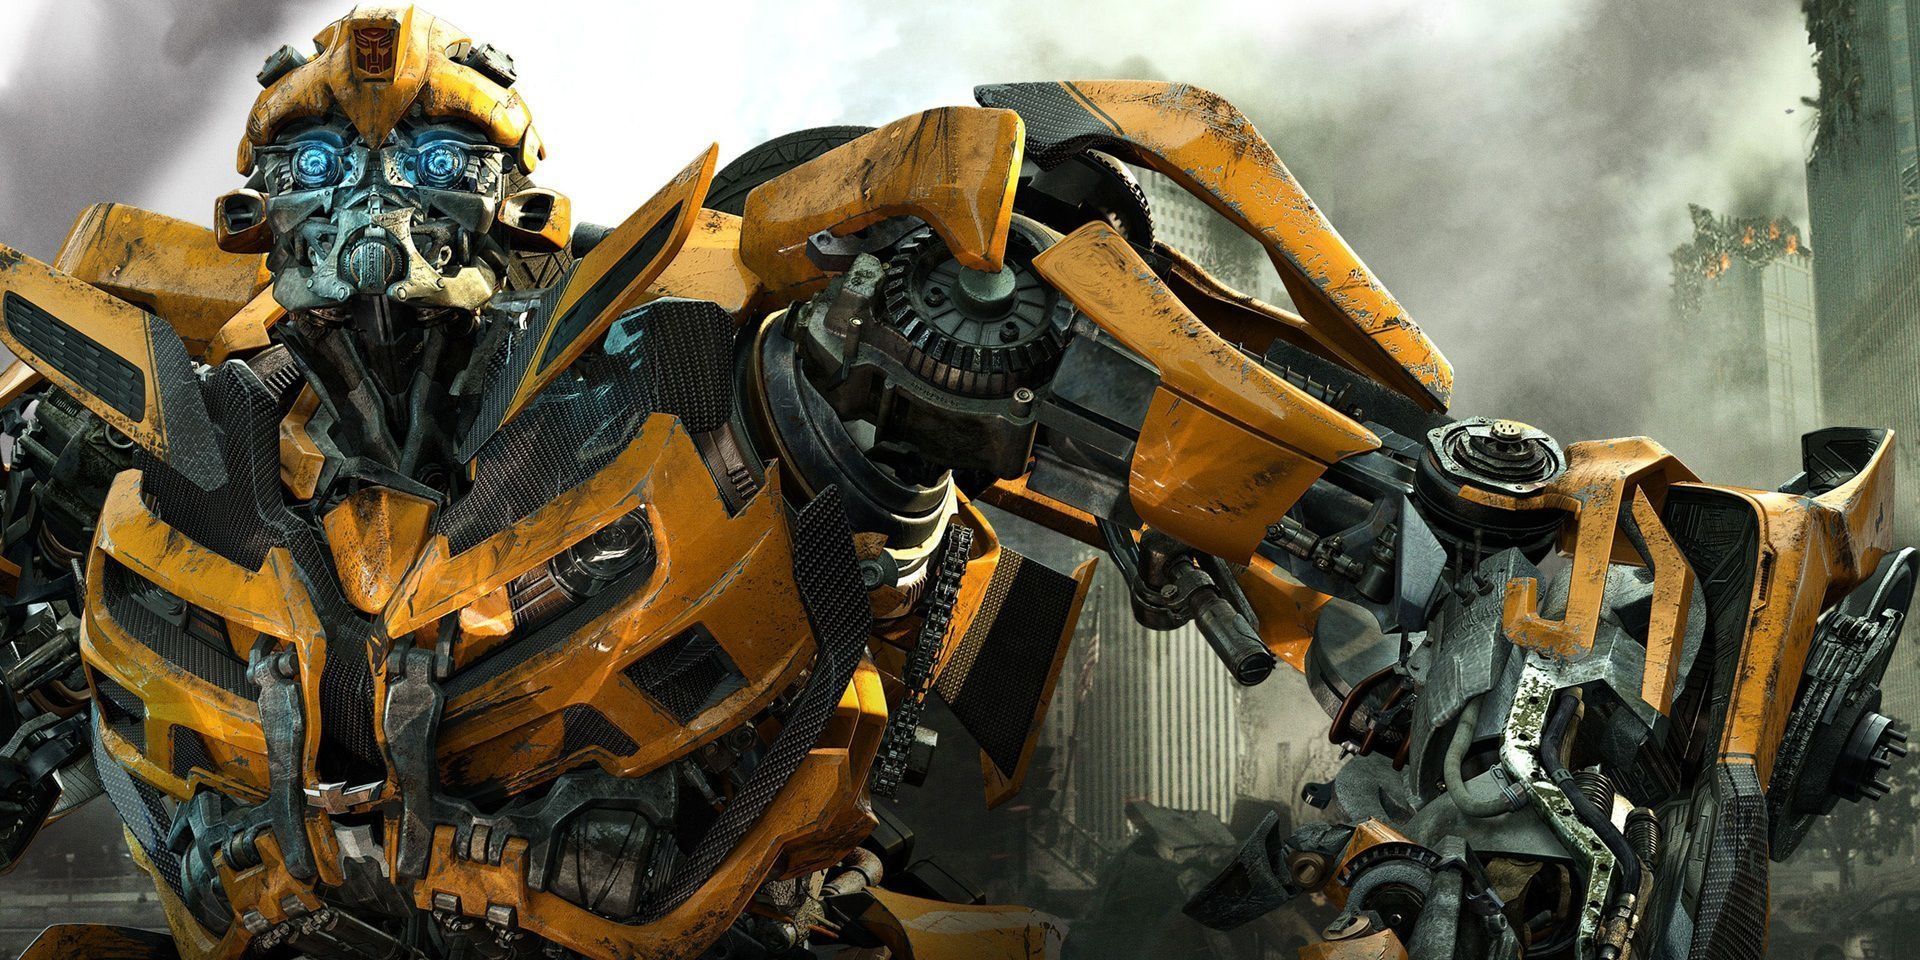 Bumblebee in the Transformers